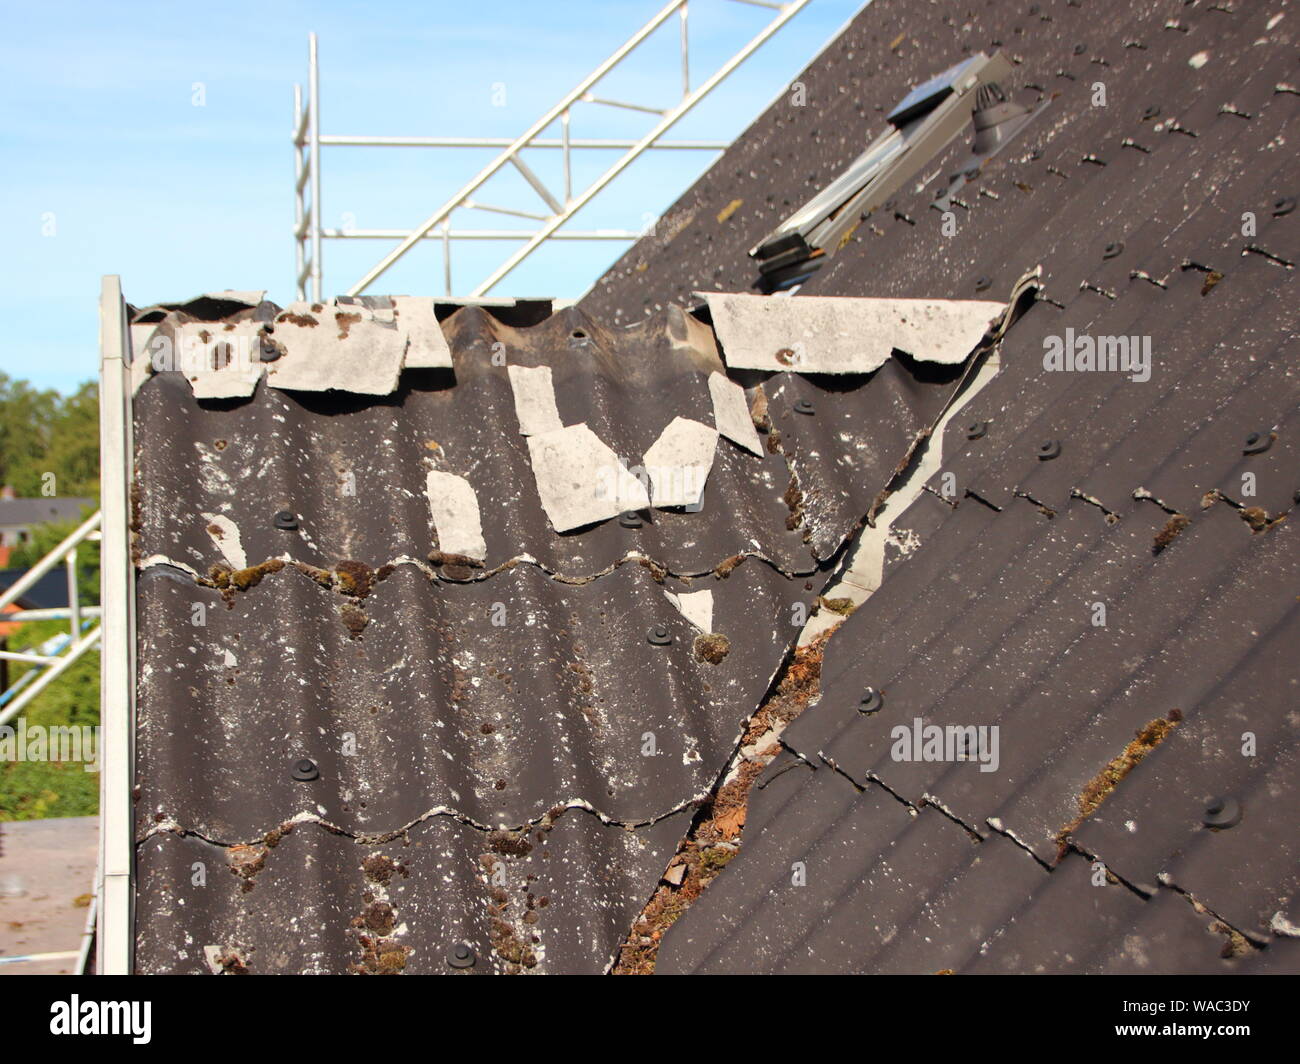 Worn Old and Demolished Curved Roof Renovation Project Stock Photo